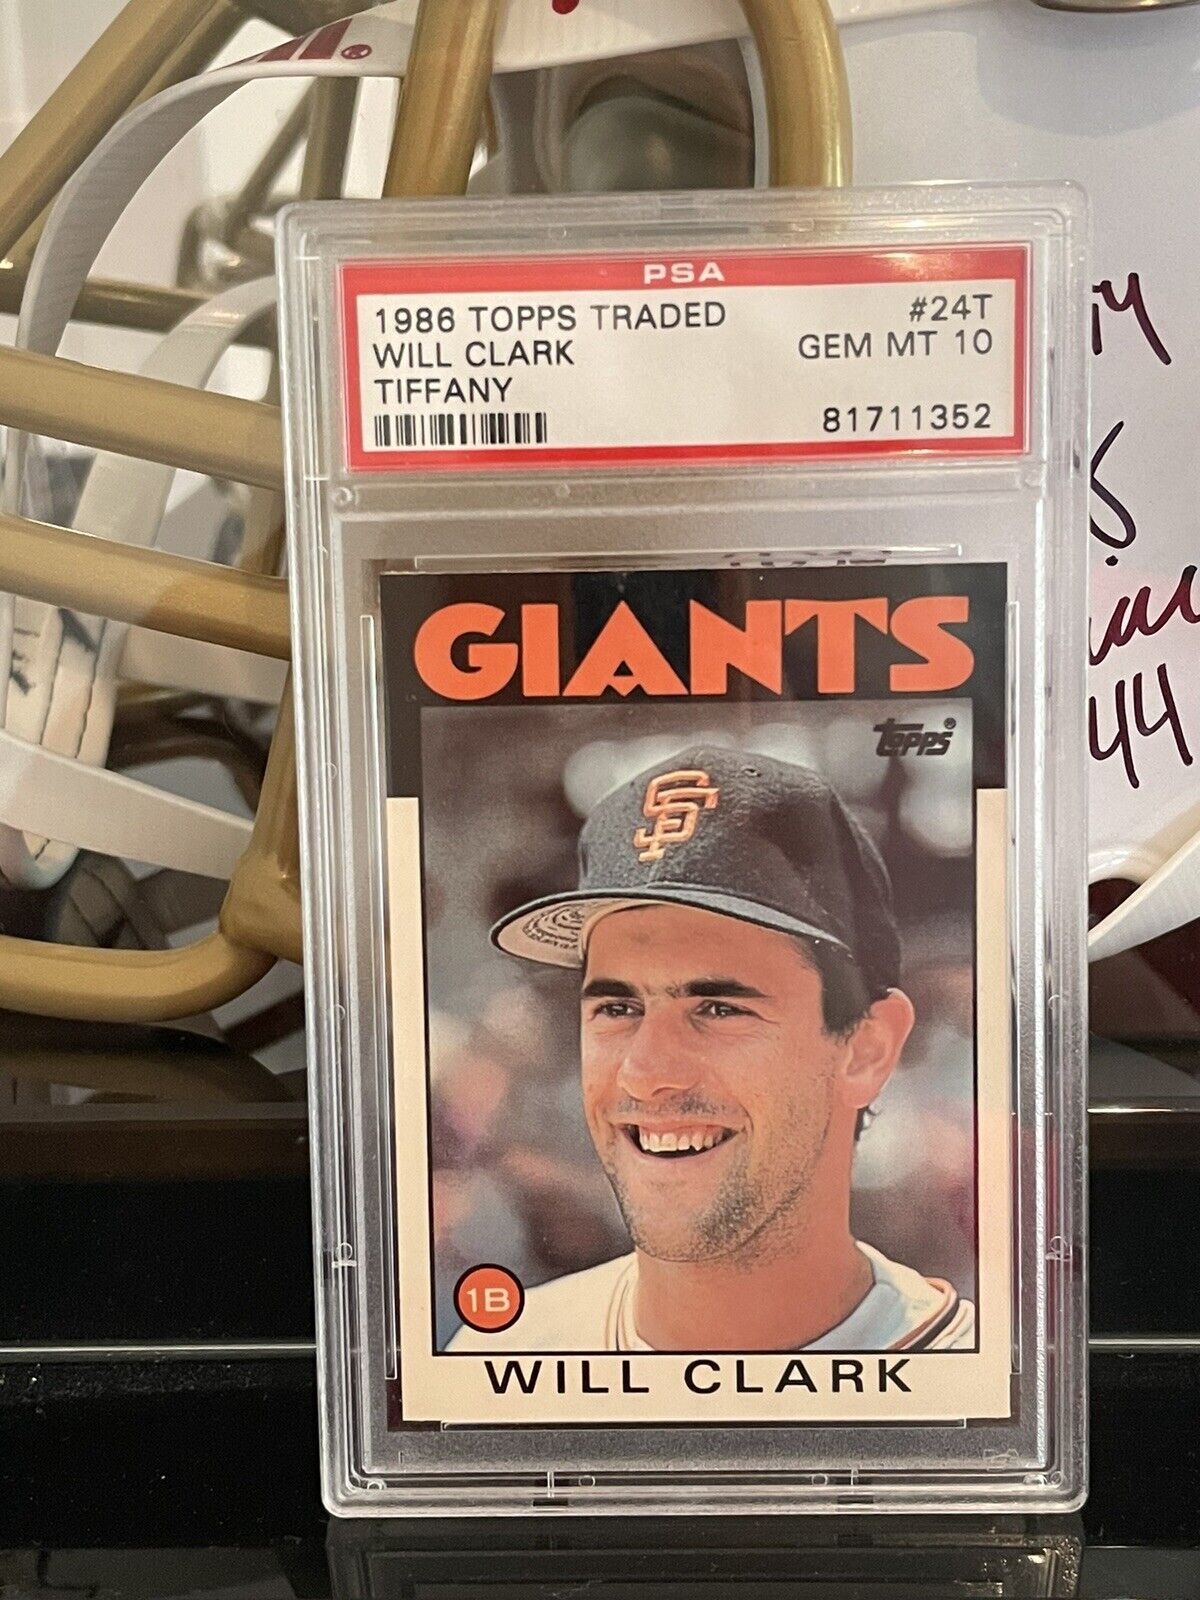 1986 Topps Traded Tiffany Will Clark PSA 10 Rookie RC SF Giants